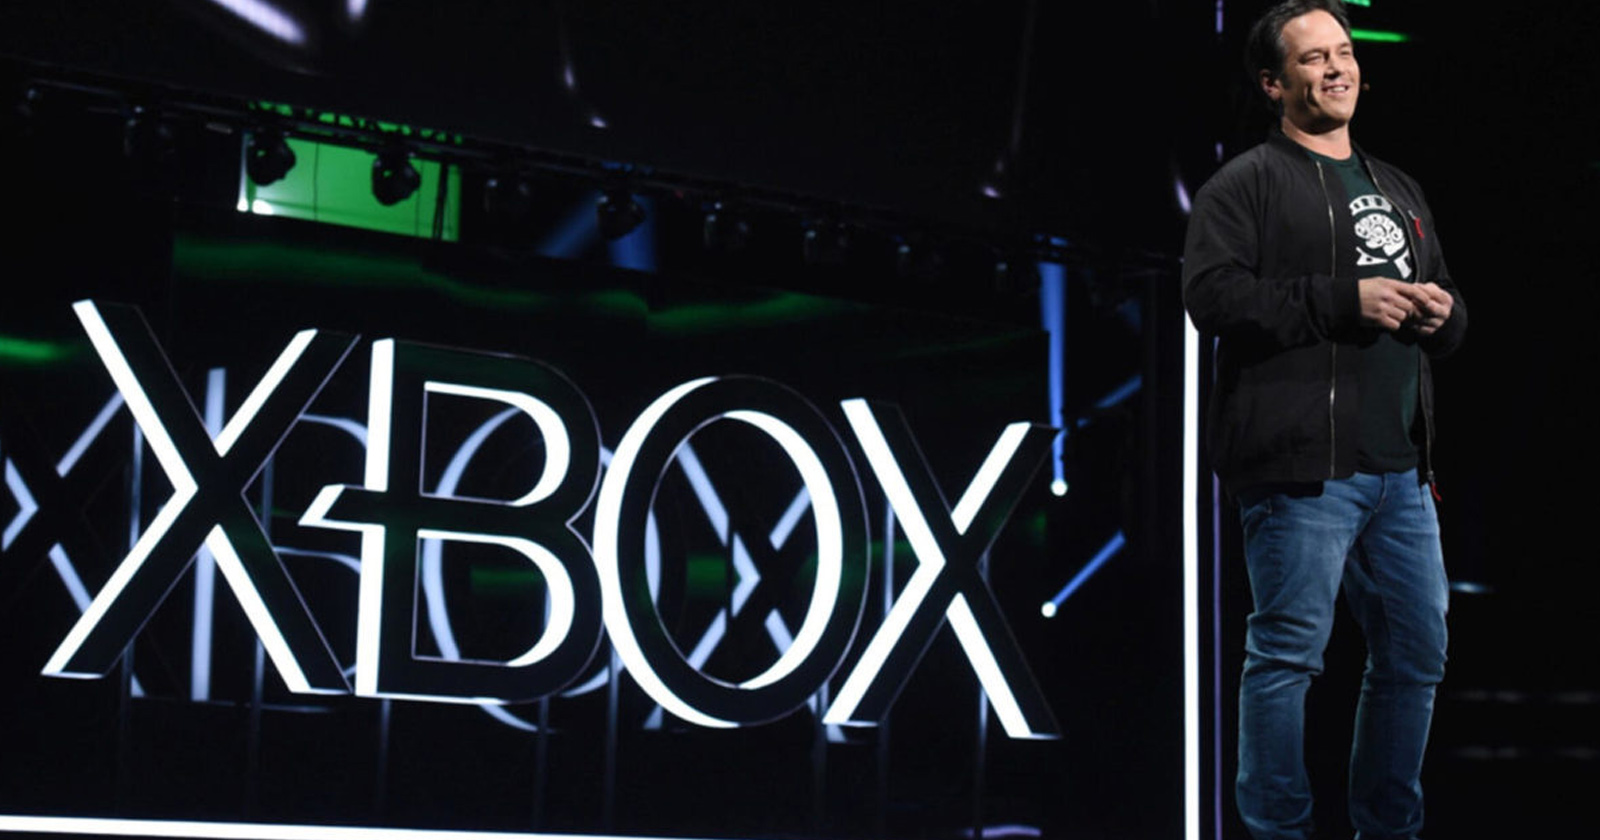 The date of Xbox’s new game launch event has been announced!